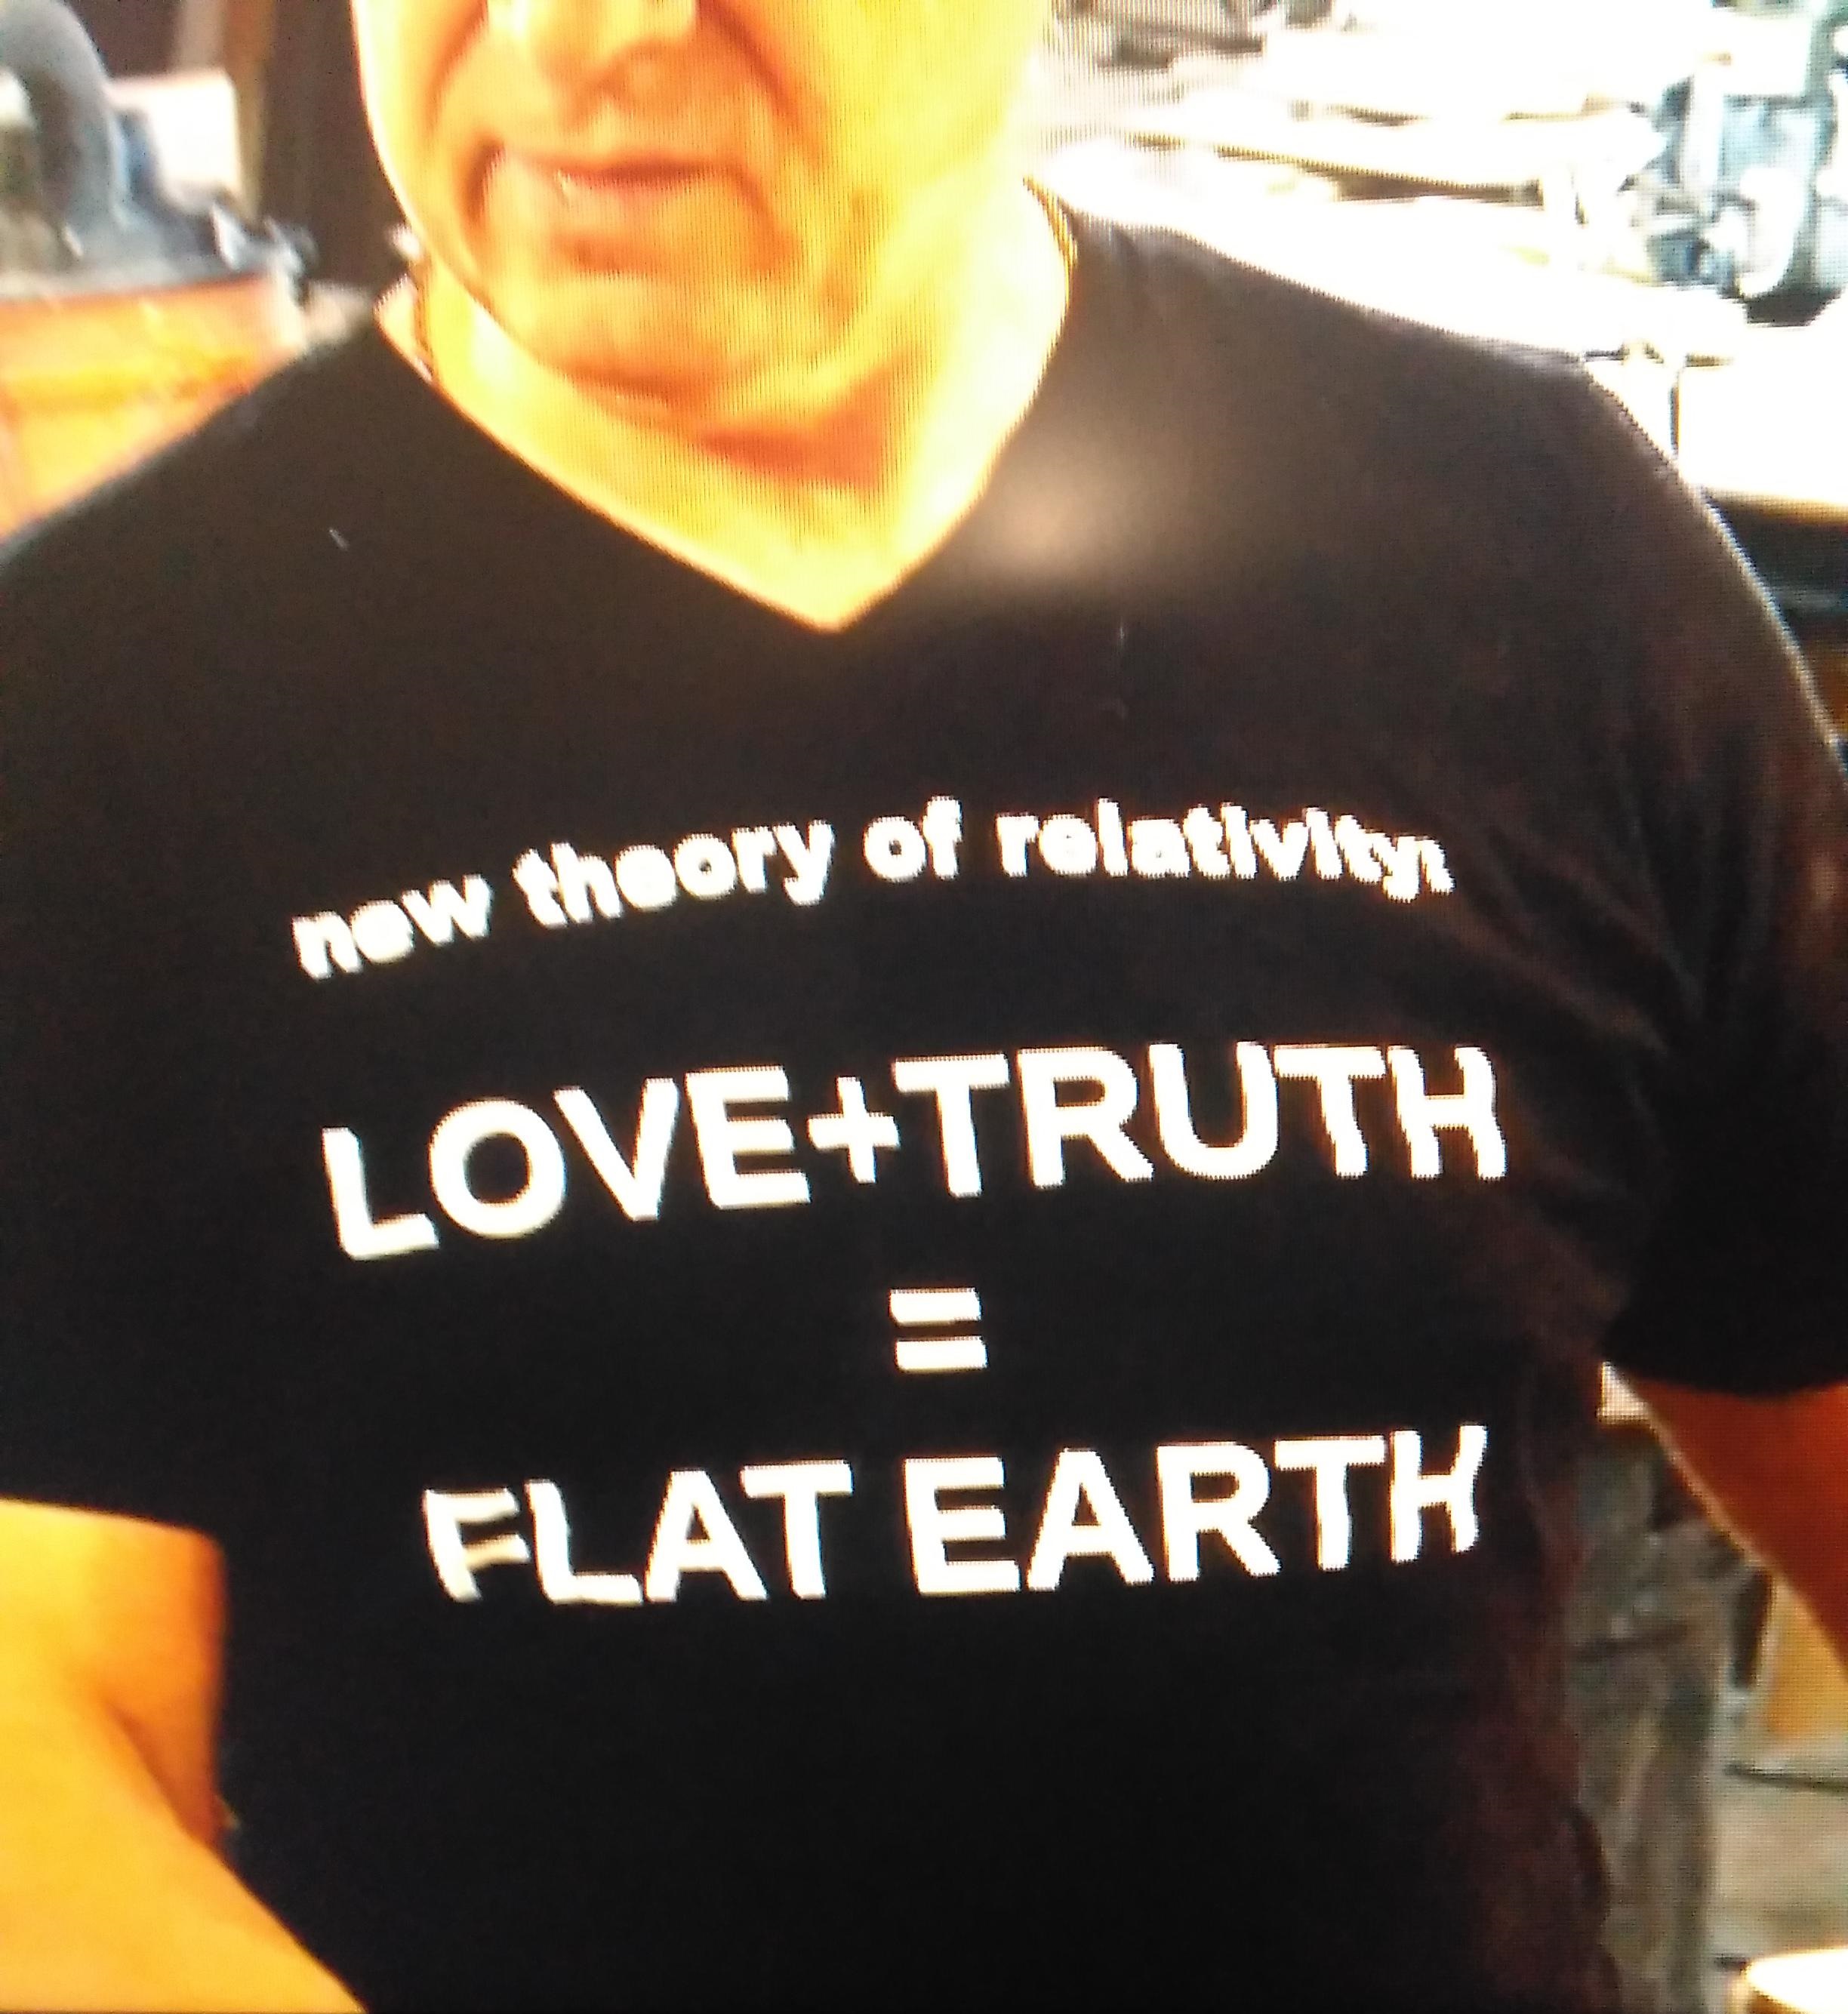 t shirt - new theory of relativity LoveTruth Flat Earth